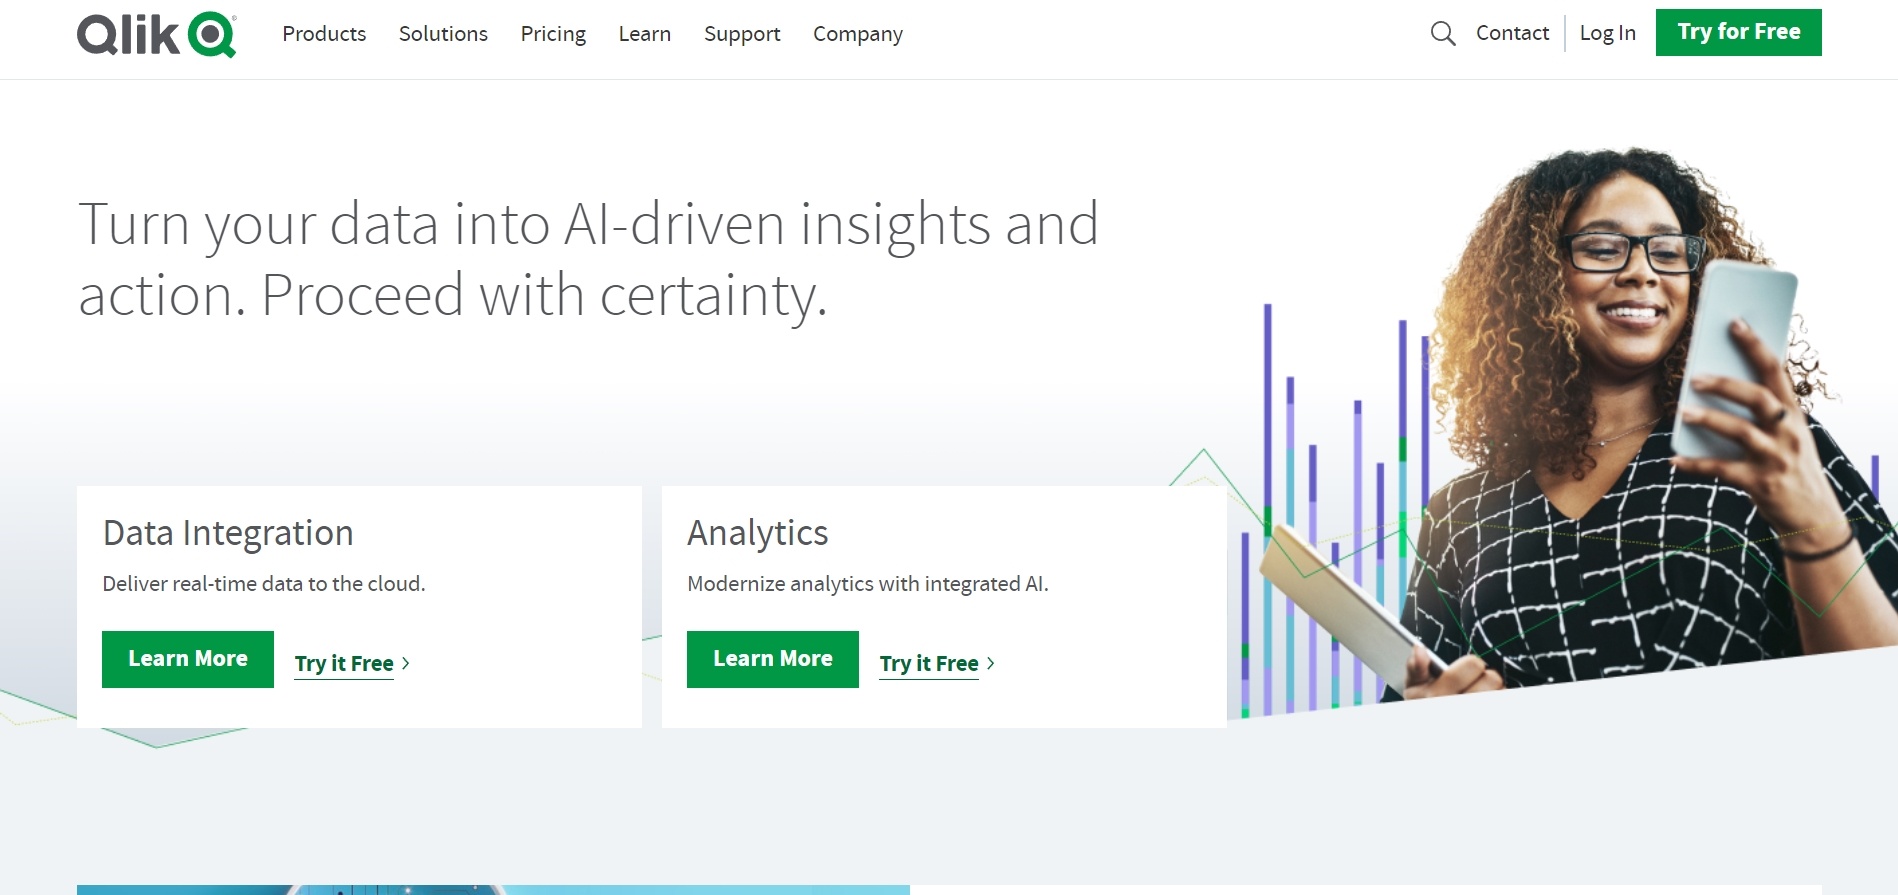 Qlik enables you to use engine analytics tool with AI for your LinkedIn business